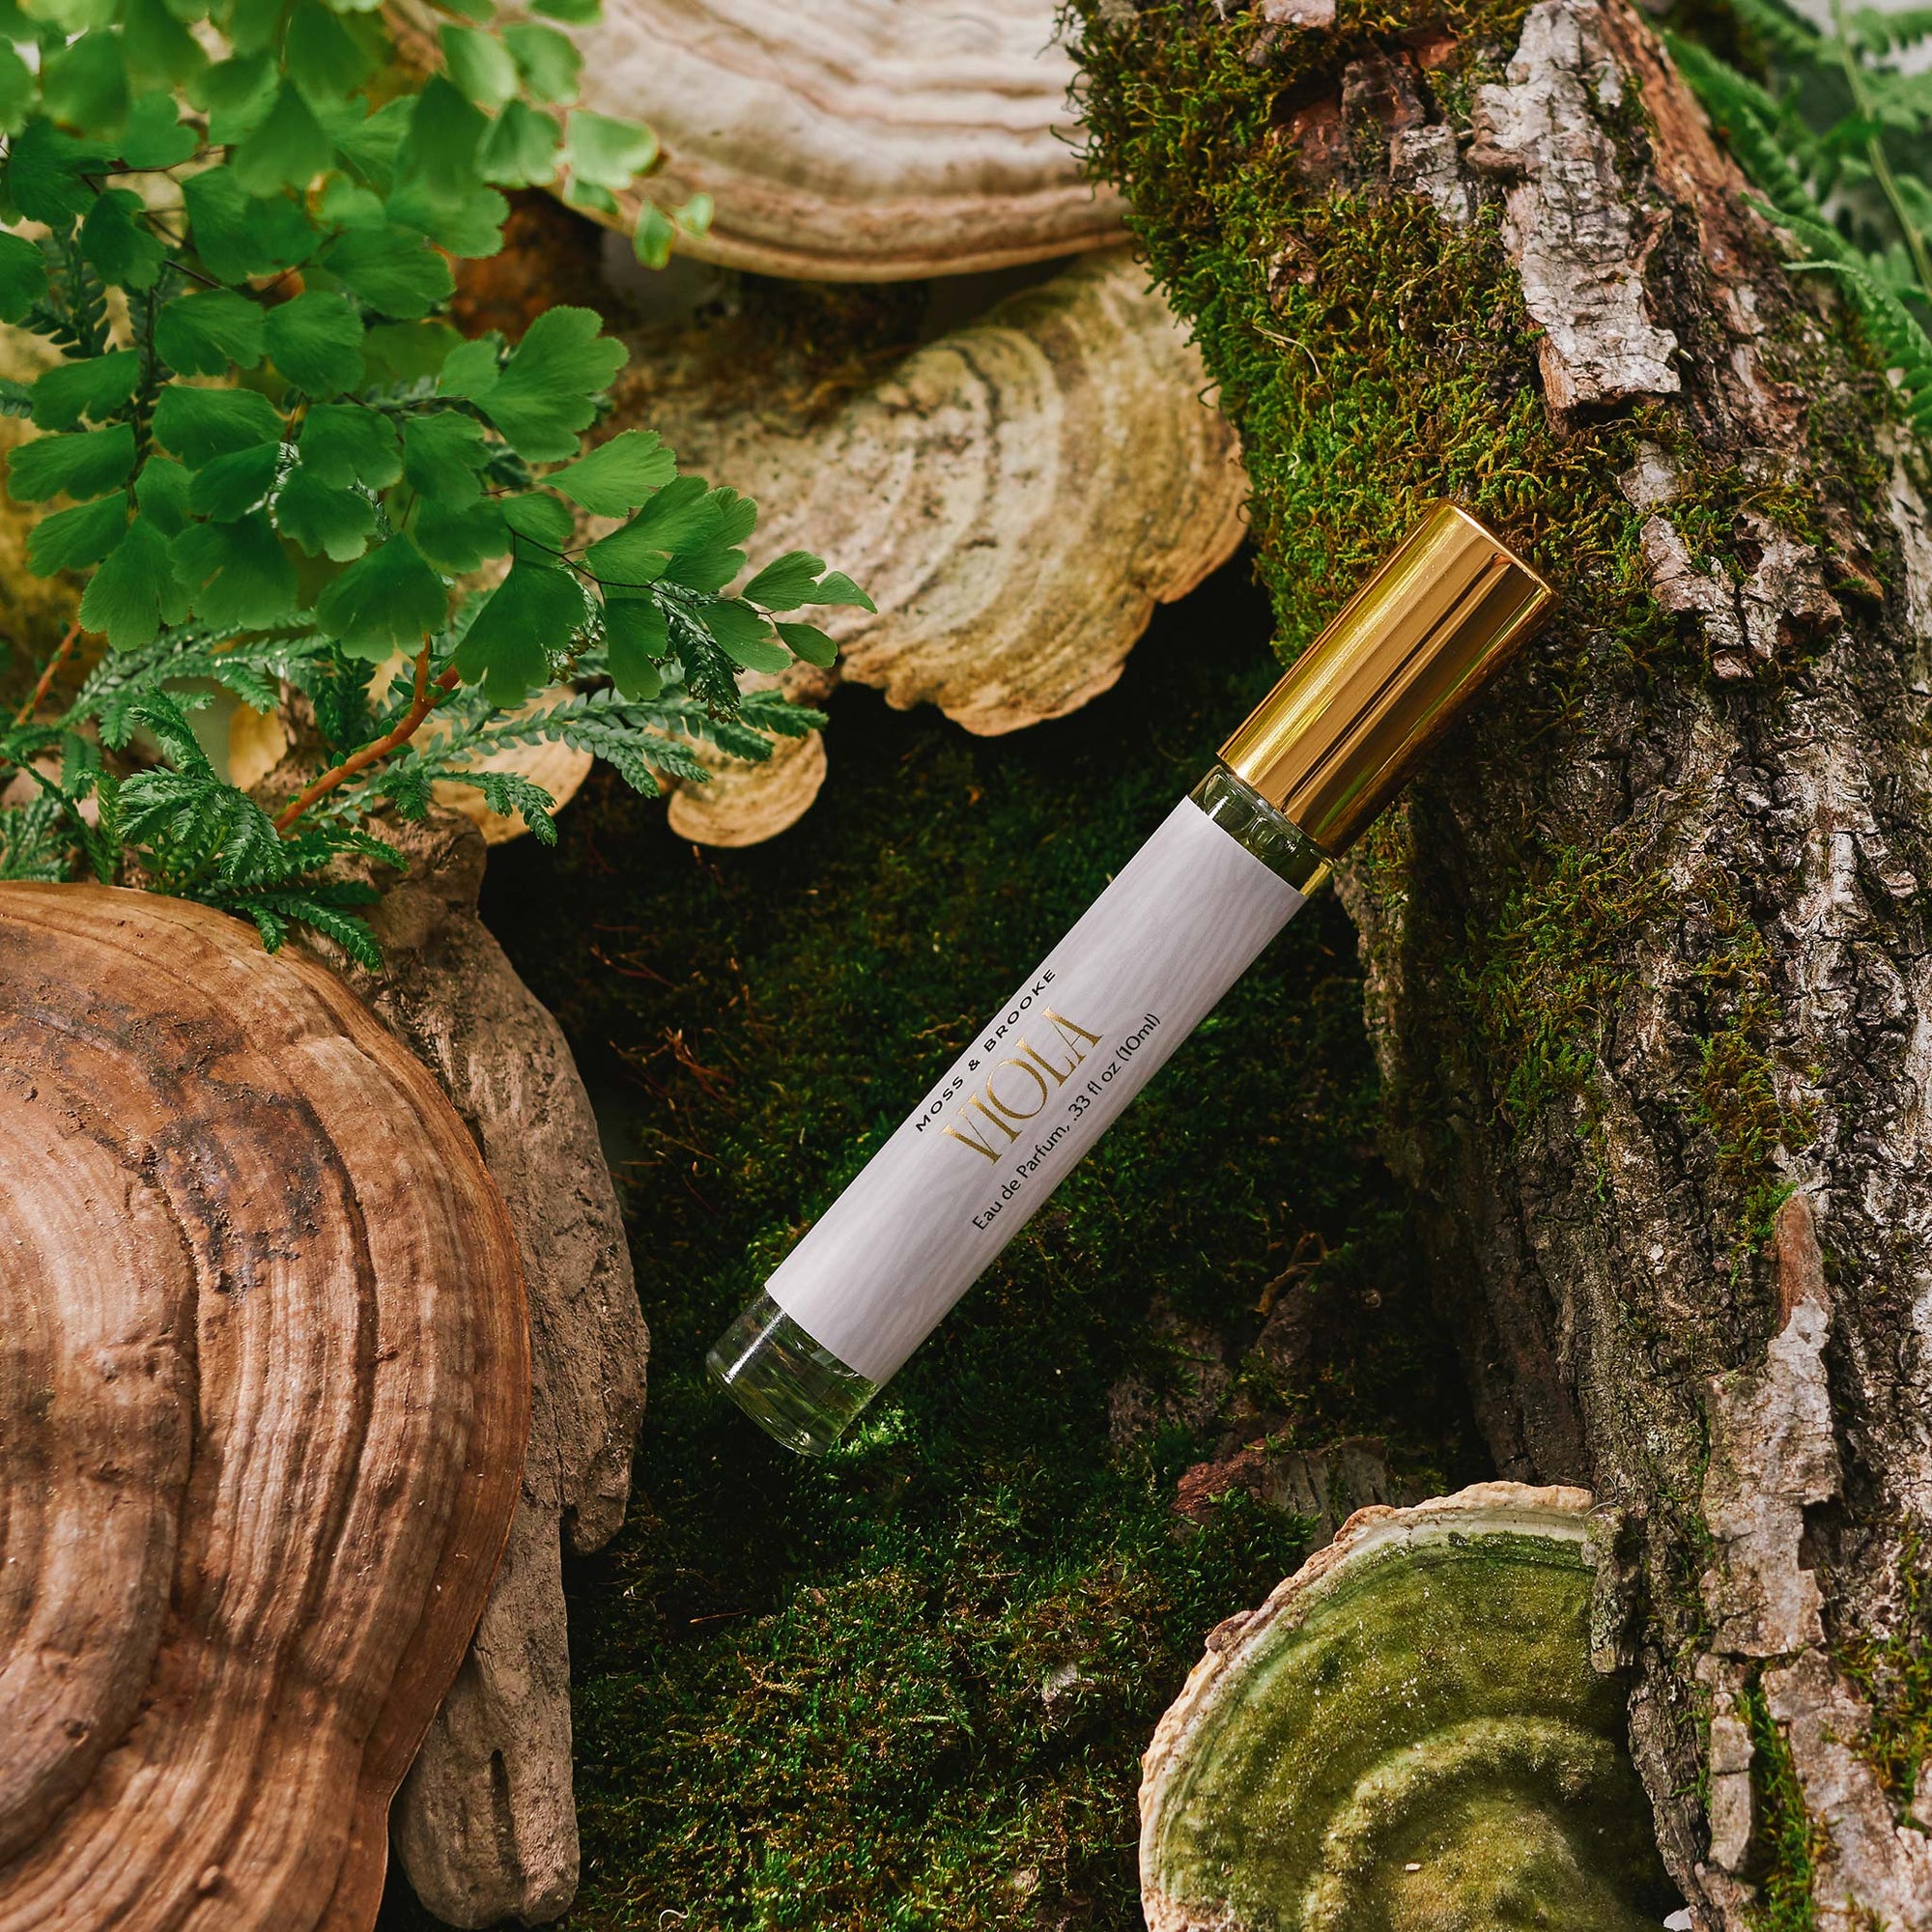 Clear bottle of Moss and Brooke Viola perfume on lush background of moss, logs and mushrooms. Violet sandalwood scented natural botanical perfume.